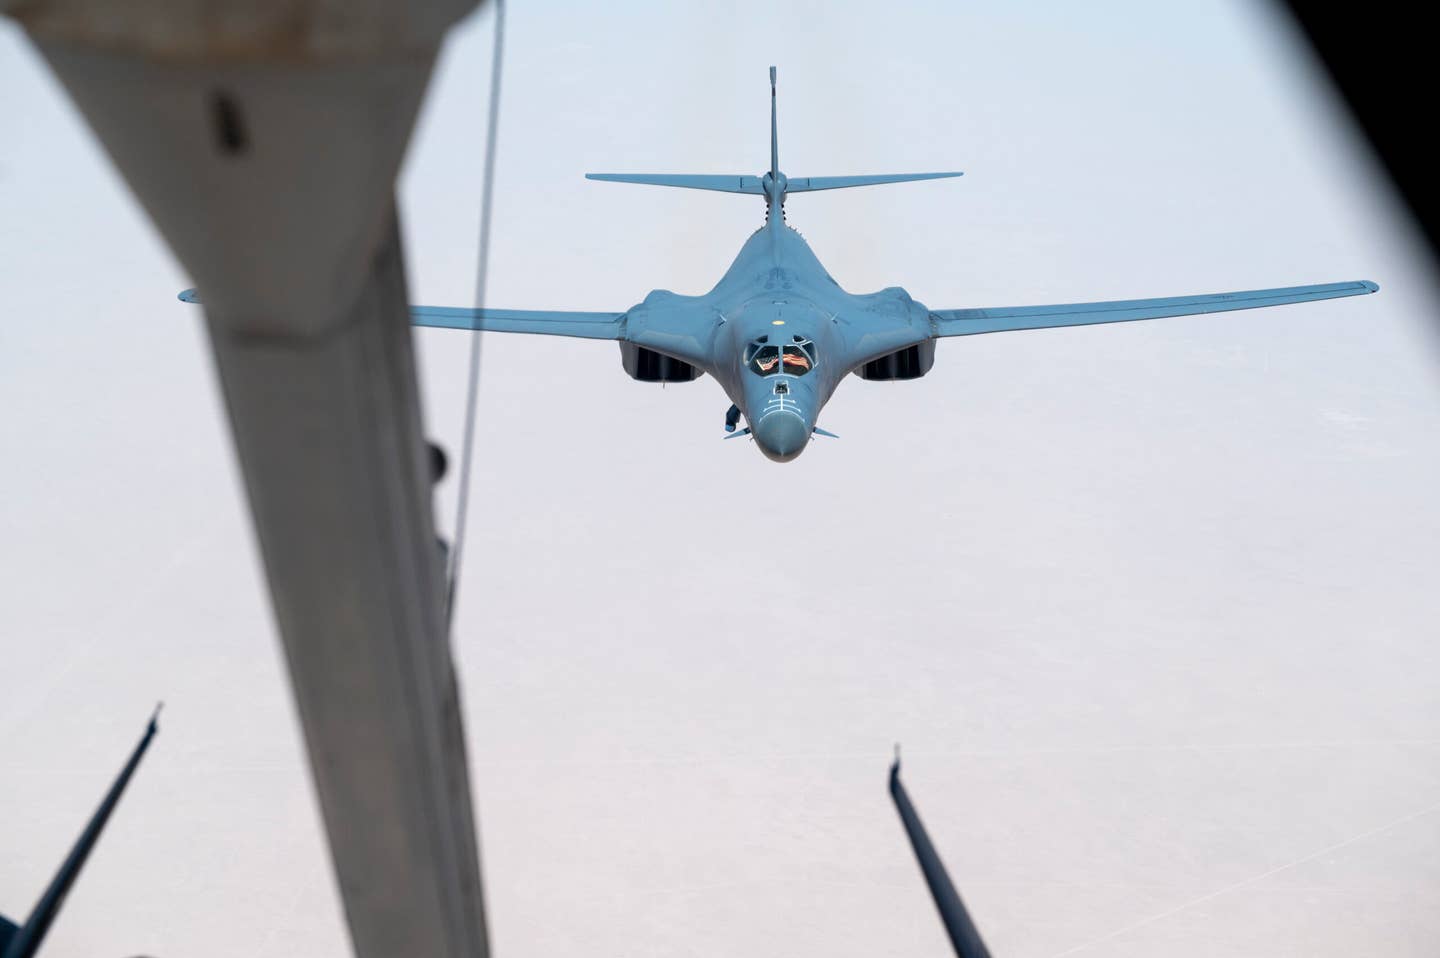 A U.S. Air Force B-1B Lancer approaches a U.S. Air Force KC-10A Extender for fuel during a Bomber Task Force mission above the Kingdom of Saudi Arabia, June 8, 2023. The BTF mission was designed to build agility and interoperability between the U.S. and coalition partners while demonstrating the rapid deployment of combat power to deter regional aggression while promoting regional stability in Southwest Asia. (U.S. Air Force photo by Staff Sgt. Frank Rohrig)